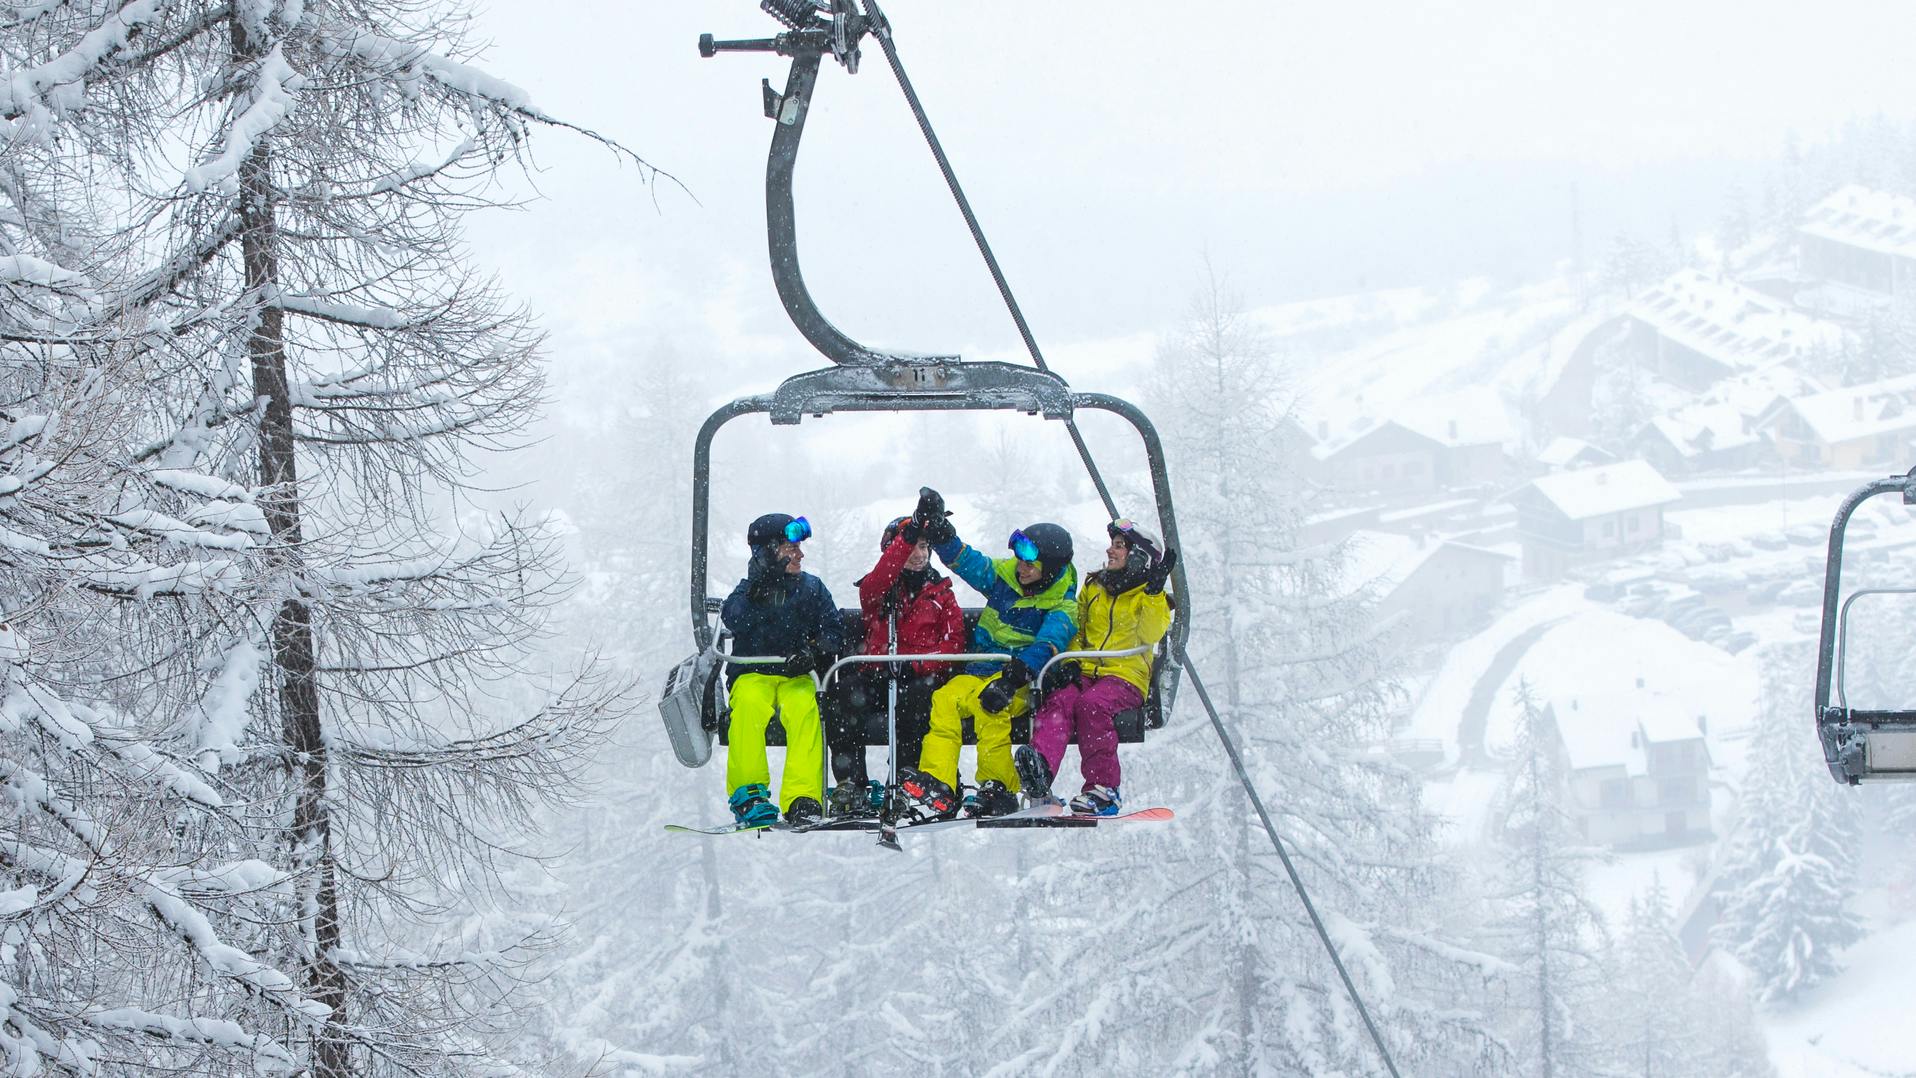 A group of four skiers and snowboarders on a chairlift